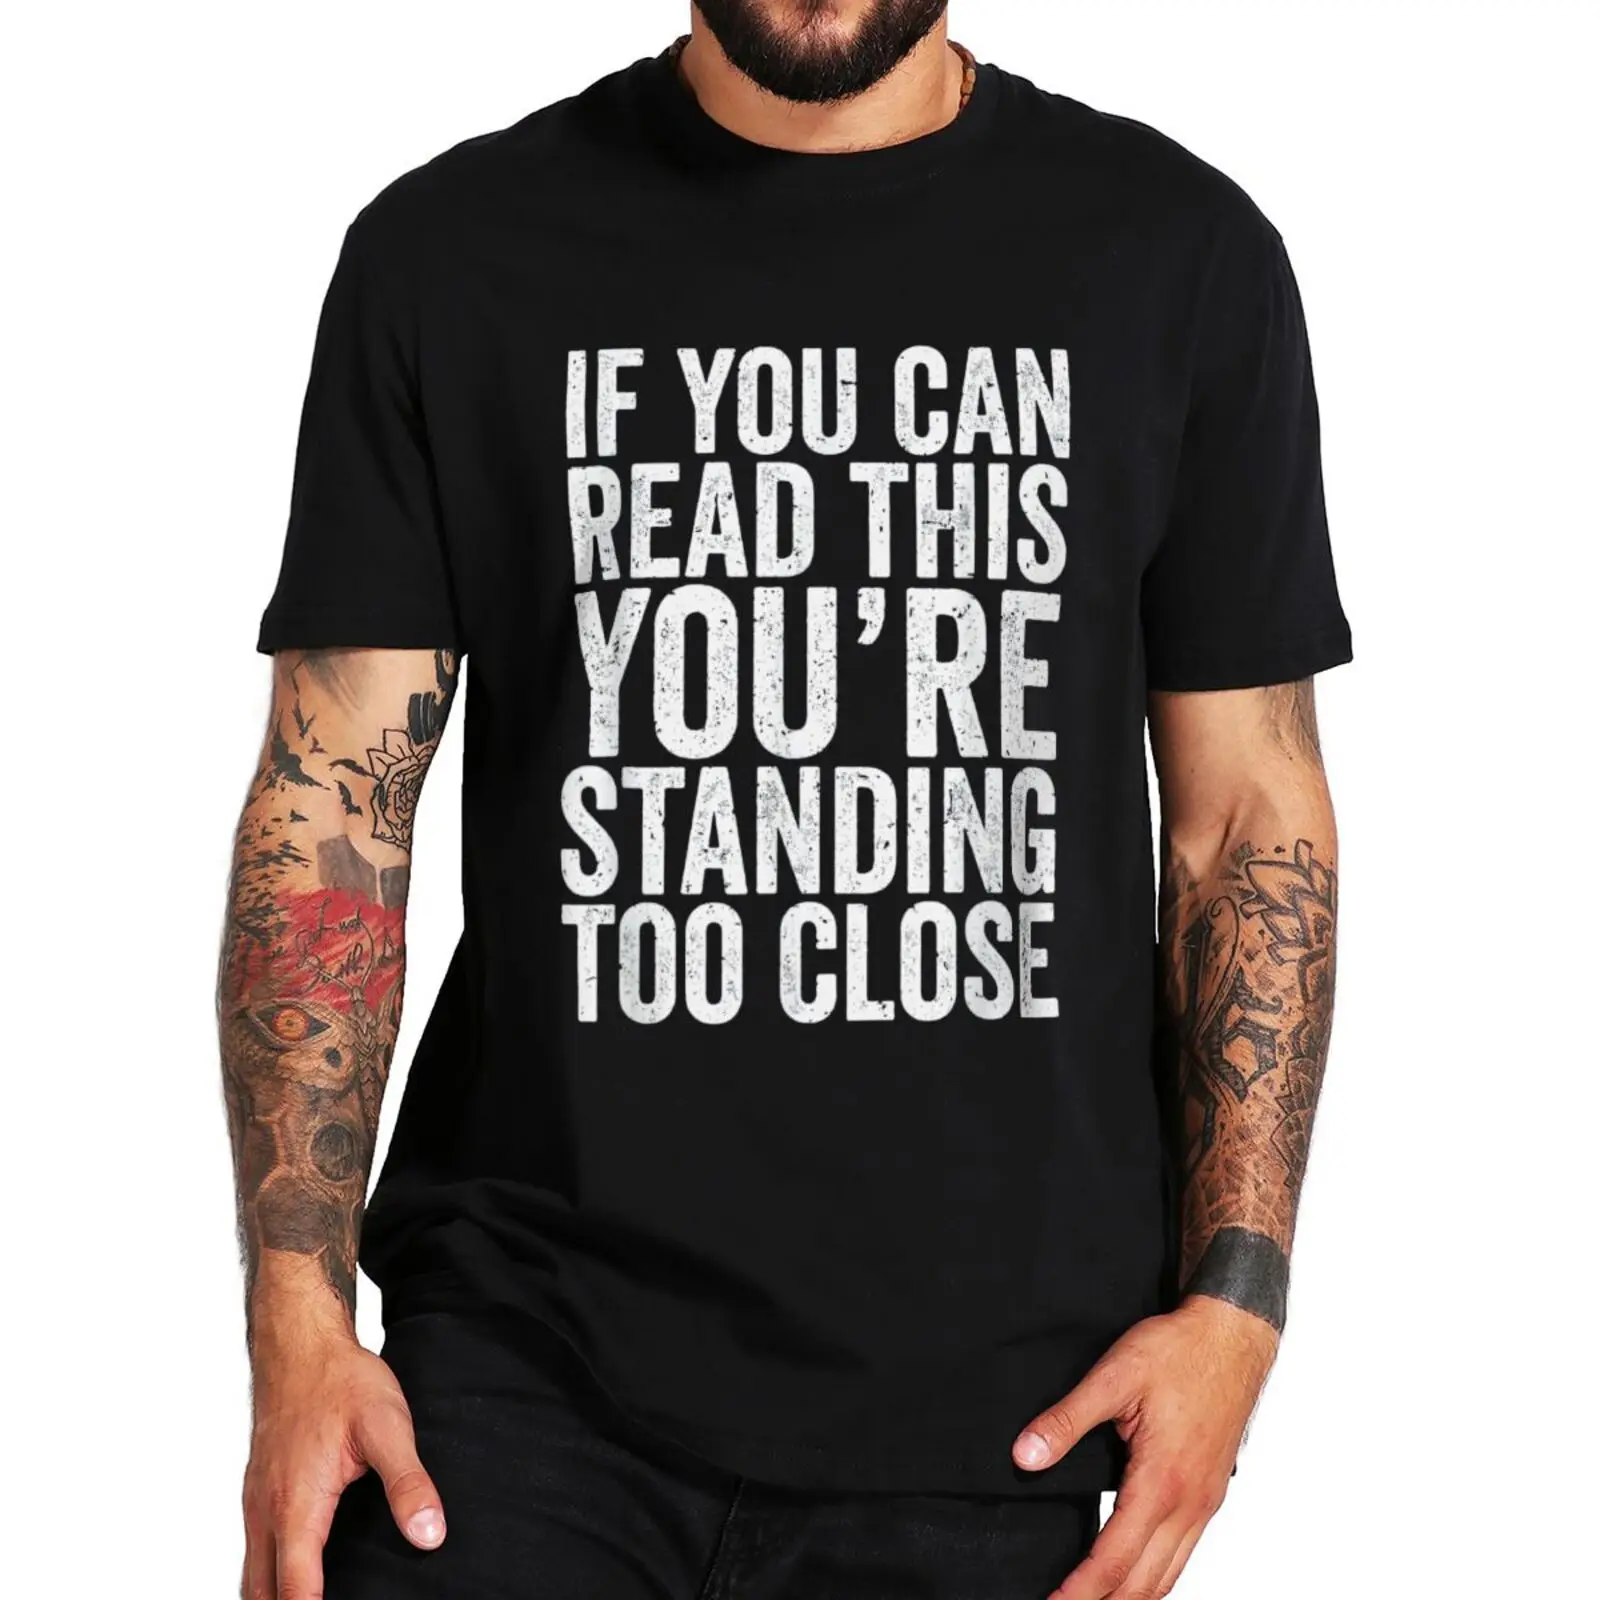 

If You Can Read This You're Standing Too Close T-shirt Funny Introvert Jokes Humor Gift Tee Casual Summer Cotton T Shirts